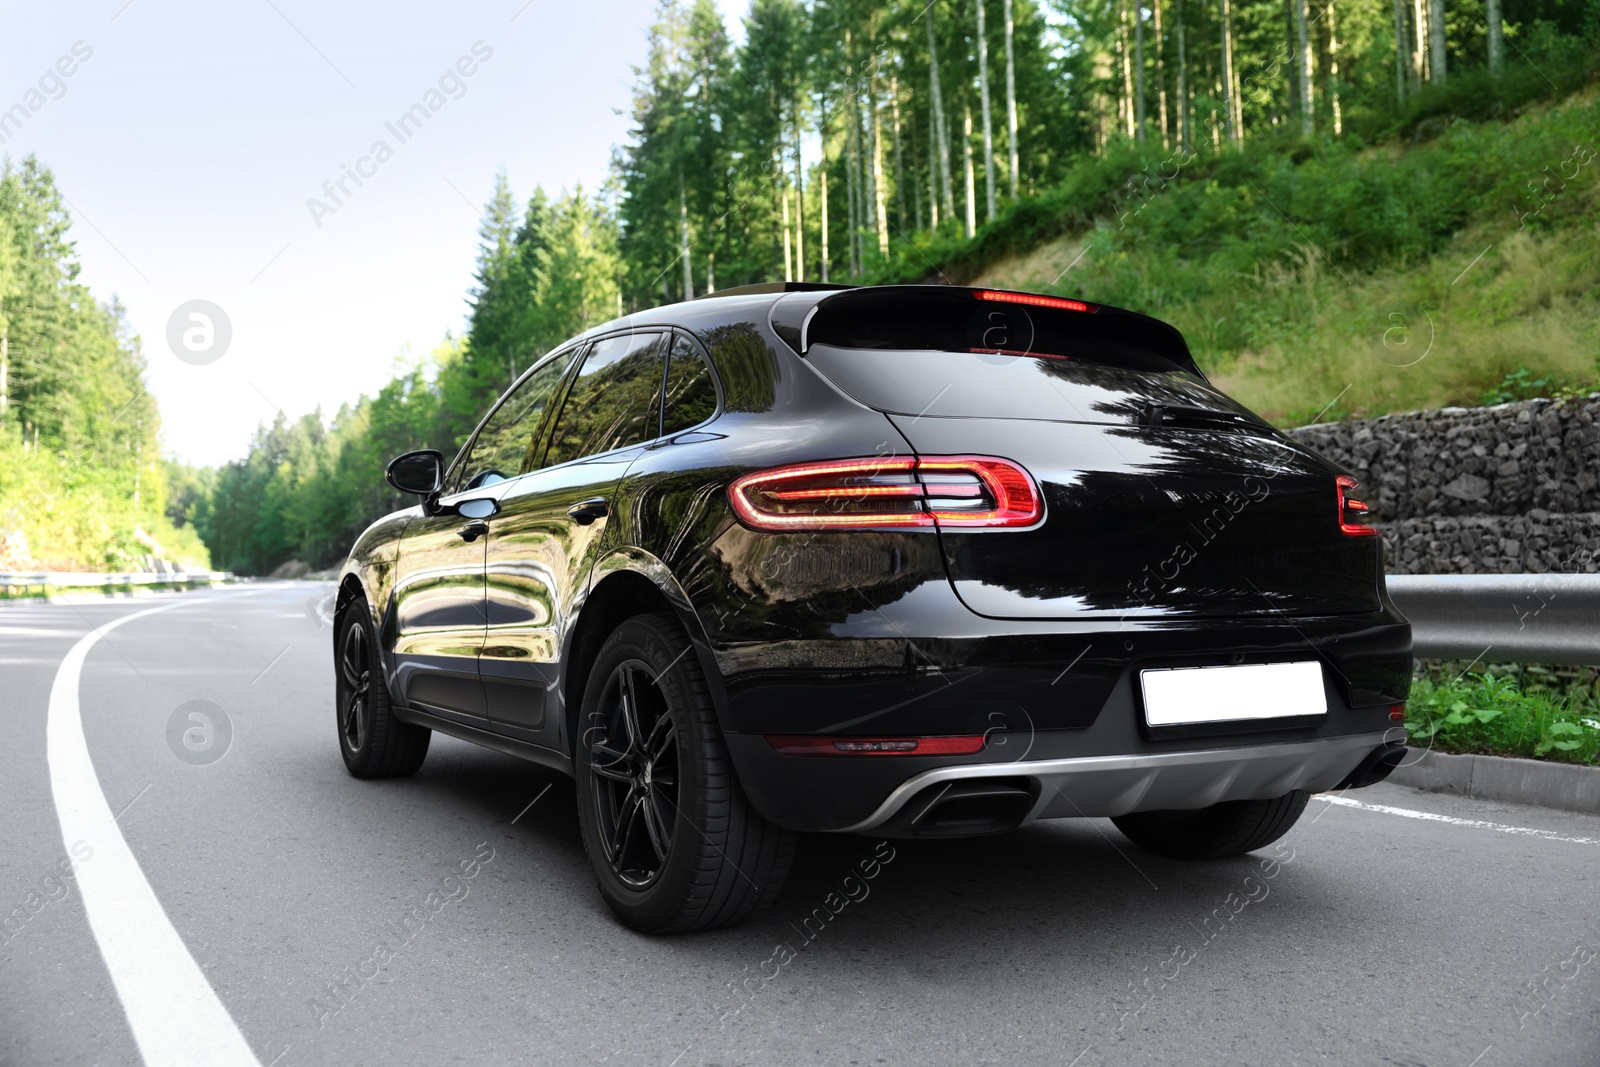 Photo of Picturesque view of modern black car on asphalt road outdoors